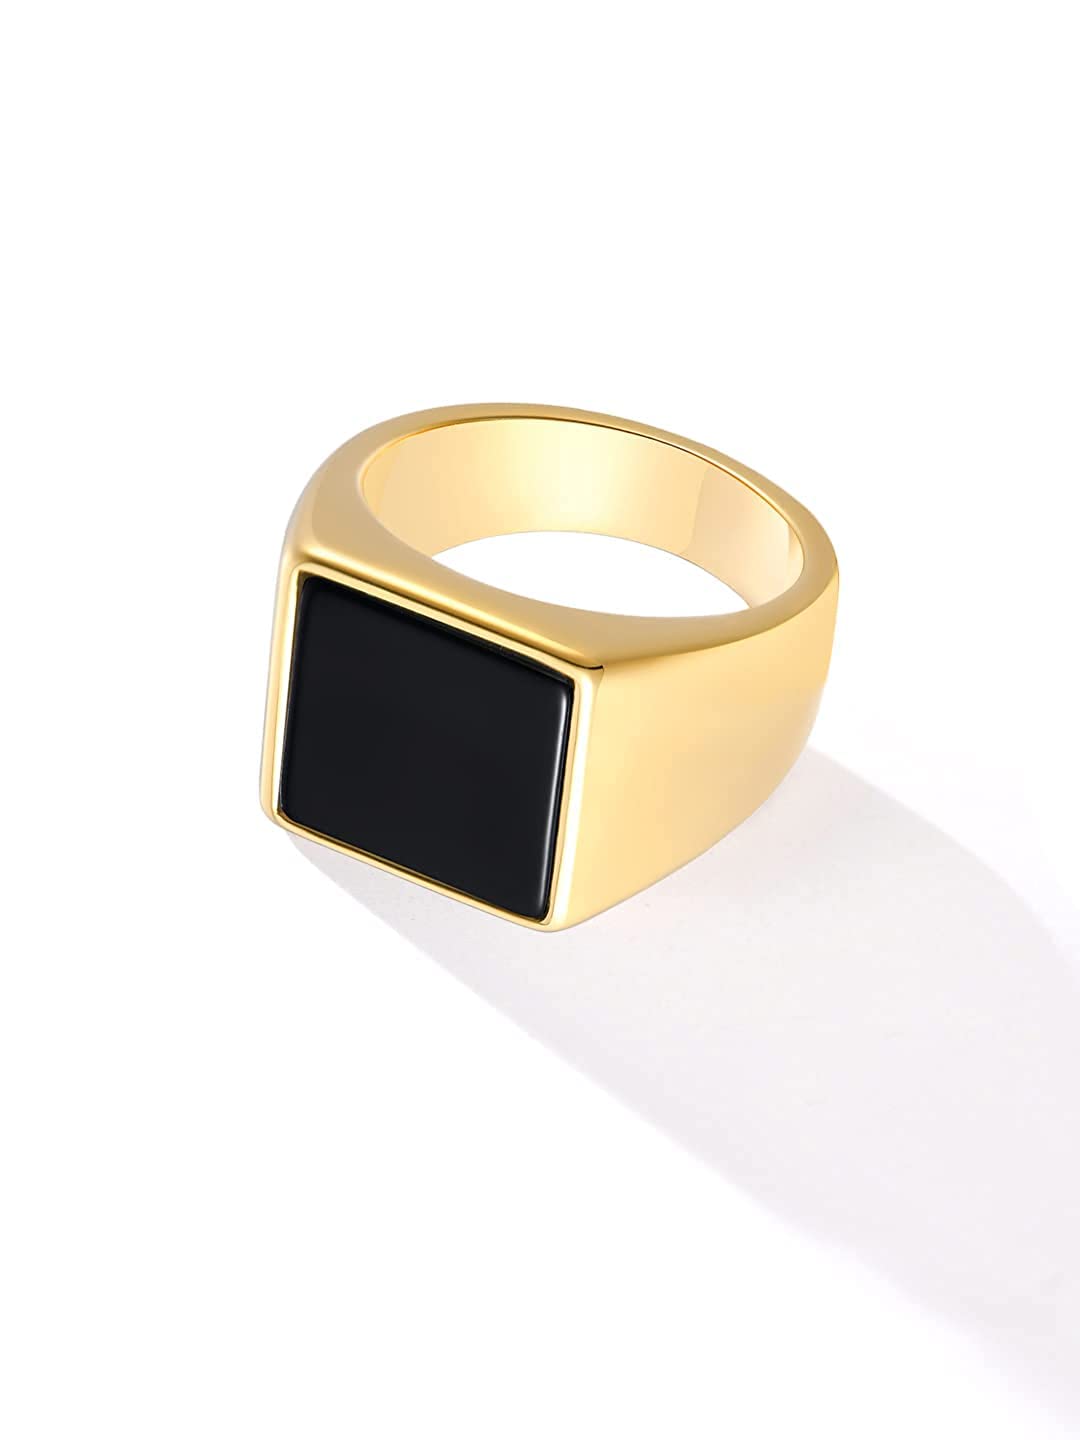 Yellow Chimes Rings for Men gold plated Black colored in Center Metal Stainless Steel Band Style Ring for men and Boys